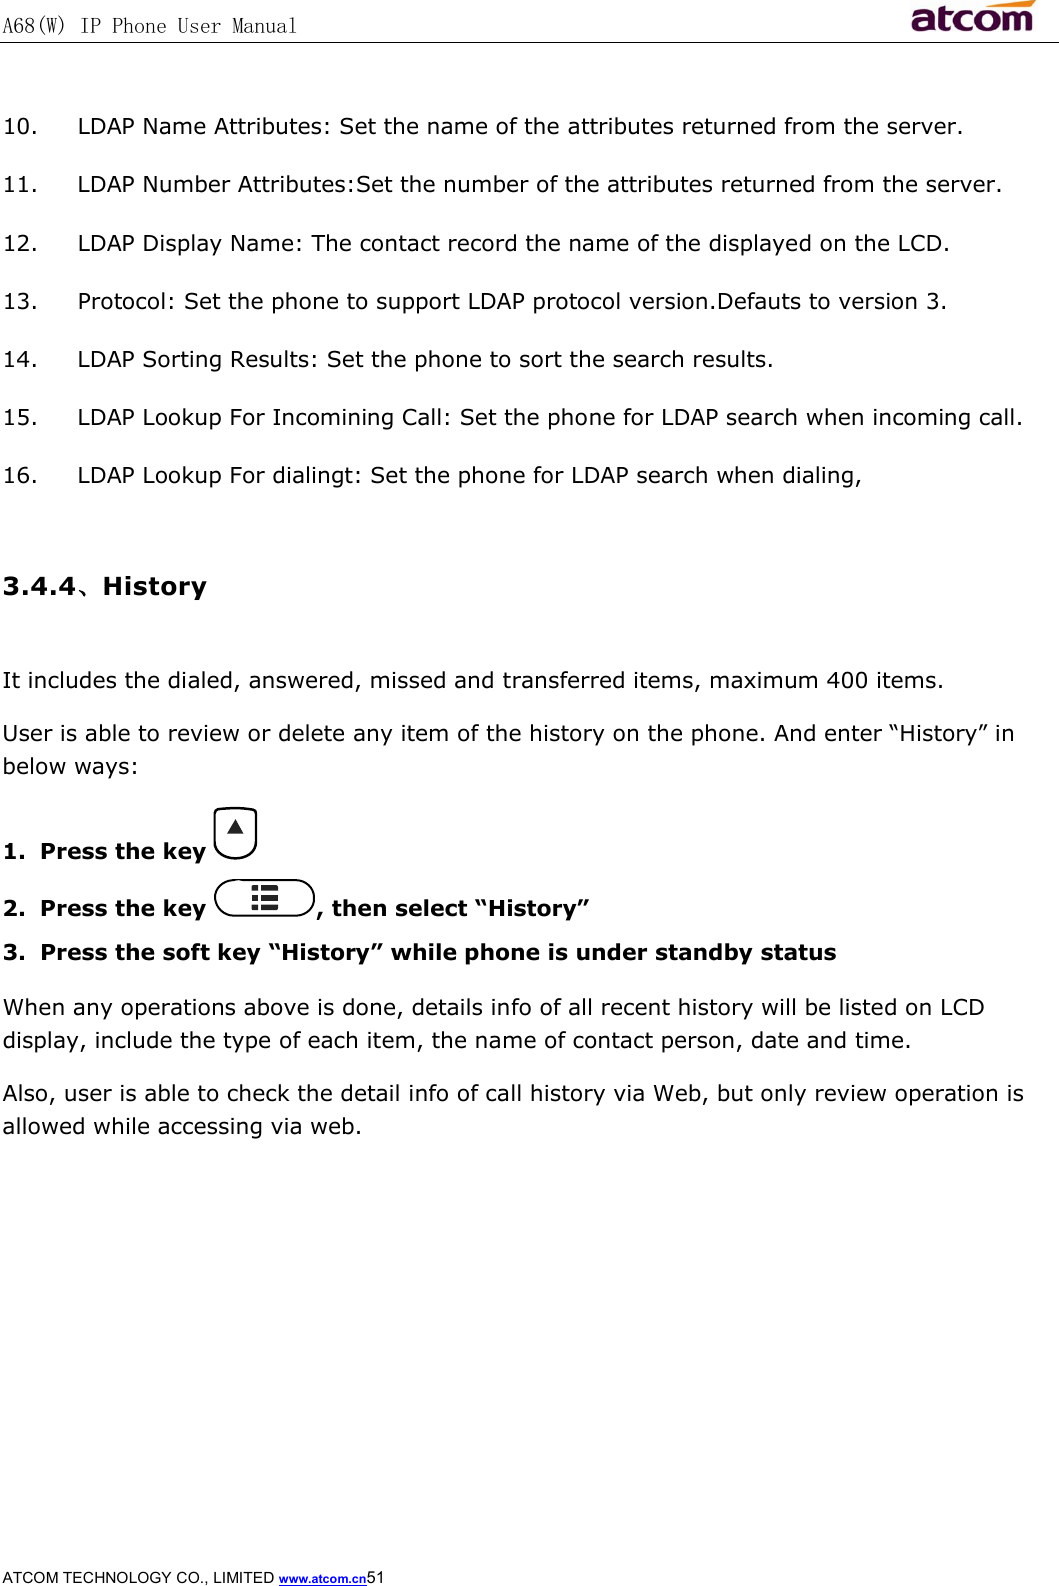 A68(W) IP Phone User Manual                                                           ATCOM TECHNOLOGY CO., LIMITED www.atcom.cn51   10. LDAP Name Attributes: Set the name of the attributes returned from the server. 11. LDAP Number Attributes:Set the number of the attributes returned from the server. 12. LDAP Display Name: The contact record the name of the displayed on the LCD.  13. Protocol: Set the phone to support LDAP protocol version.Defauts to version 3. 14. LDAP Sorting Results: Set the phone to sort the search results. 15. LDAP Lookup For Incomining Call: Set the phone for LDAP search when incoming call.  16. LDAP Lookup For dialingt: Set the phone for LDAP search when dialing,  3.4.4、History  It includes the dialed, answered, missed and transferred items, maximum 400 items. User is able to review or delete any item of the history on the phone. And enter “History” in below ways: 1. Press the key   2. Press the key  , then select “History” 3. Press the soft key “History” while phone is under standby status When any operations above is done, details info of all recent history will be listed on LCD display, include the type of each item, the name of contact person, date and time. Also, user is able to check the detail info of call history via Web, but only review operation is allowed while accessing via web.  